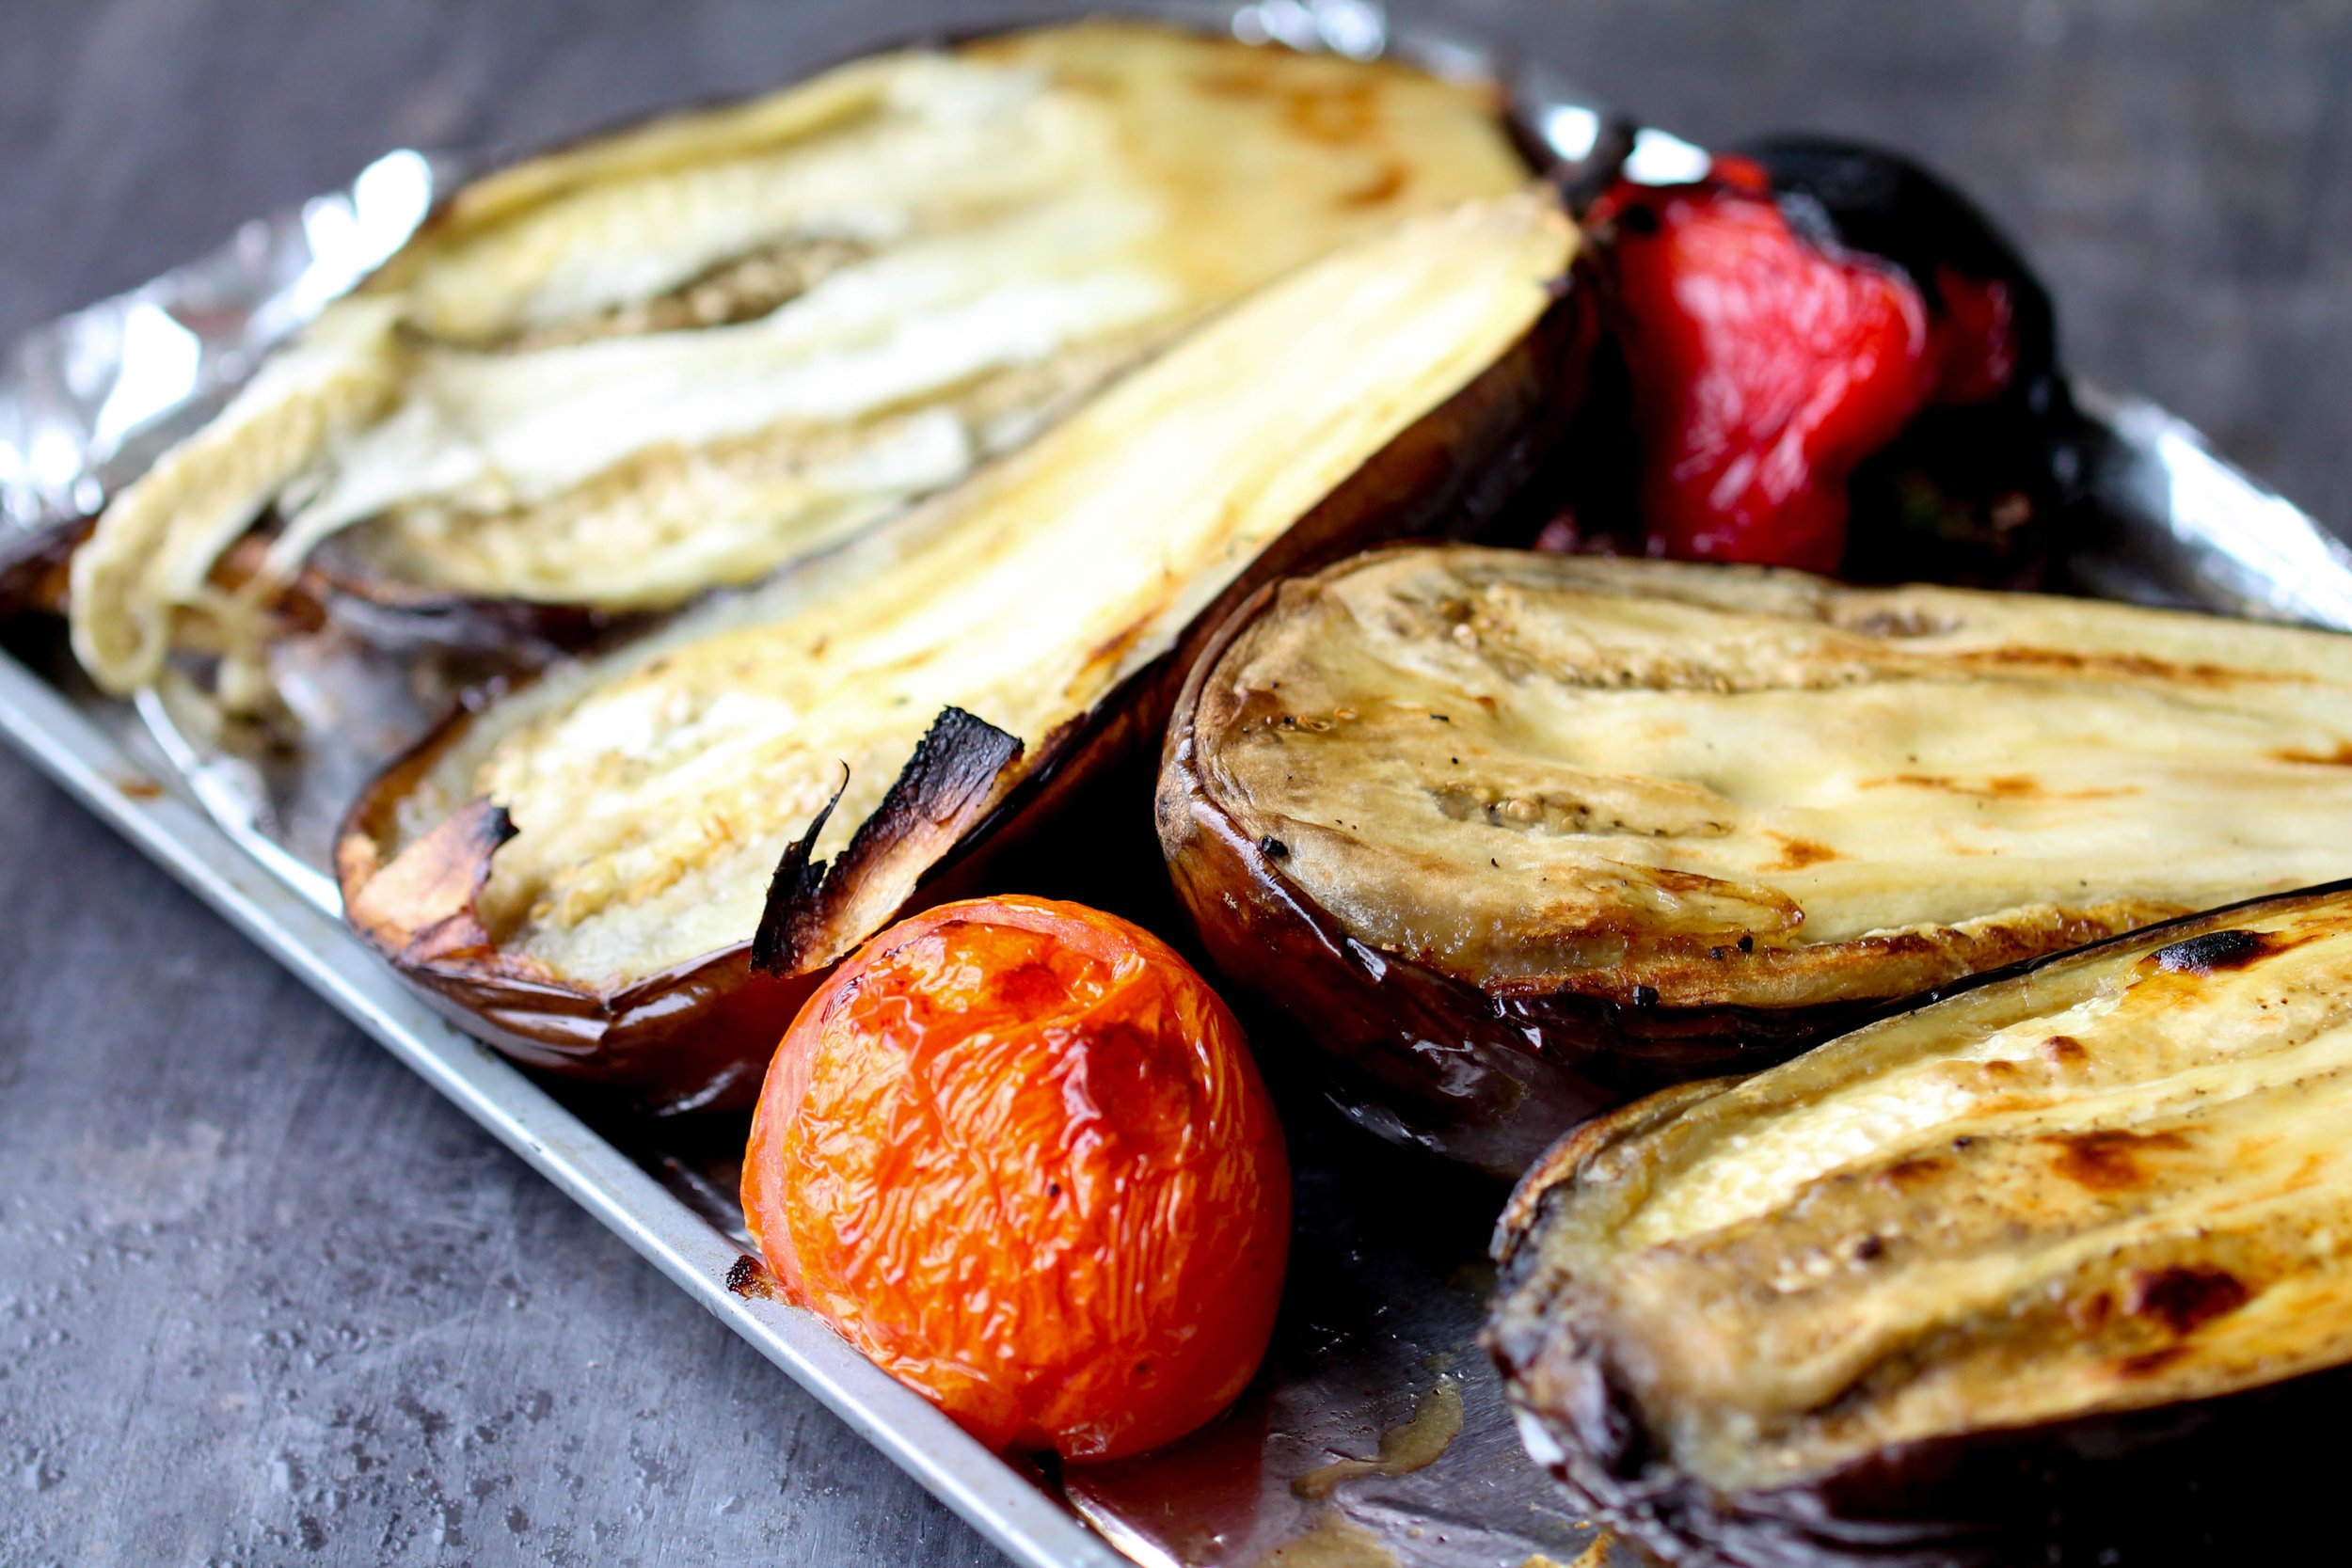 Naturally Vegan, Gluten-Free Roasted Eggplant, Bell Peppers, and Tomato Salad! It works great as side, filling for a quick wrap, or use it as pizza base